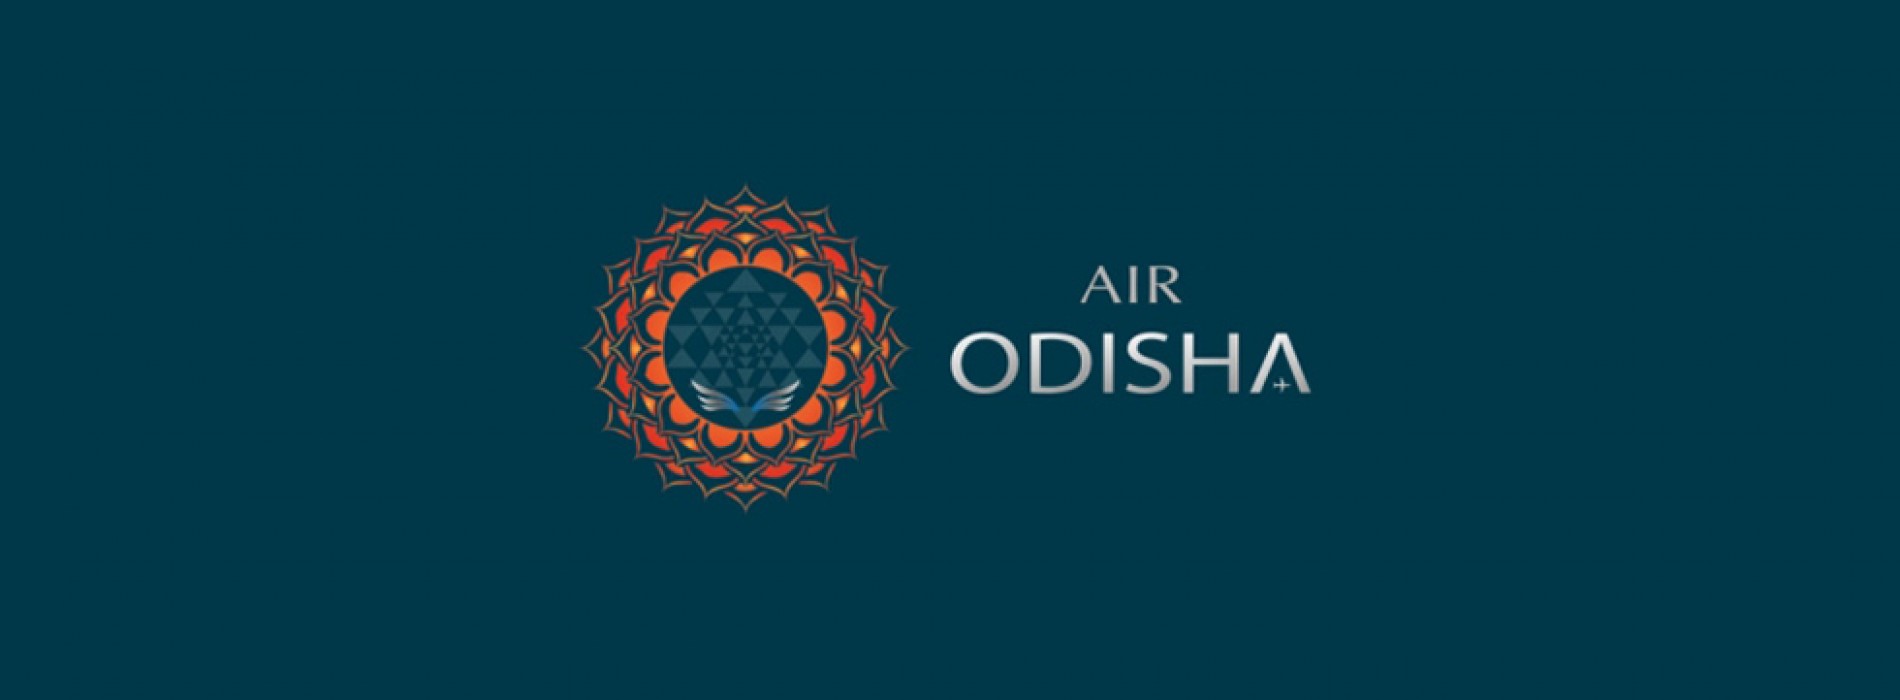 India’s Air Odisha secures scheduled operator permit